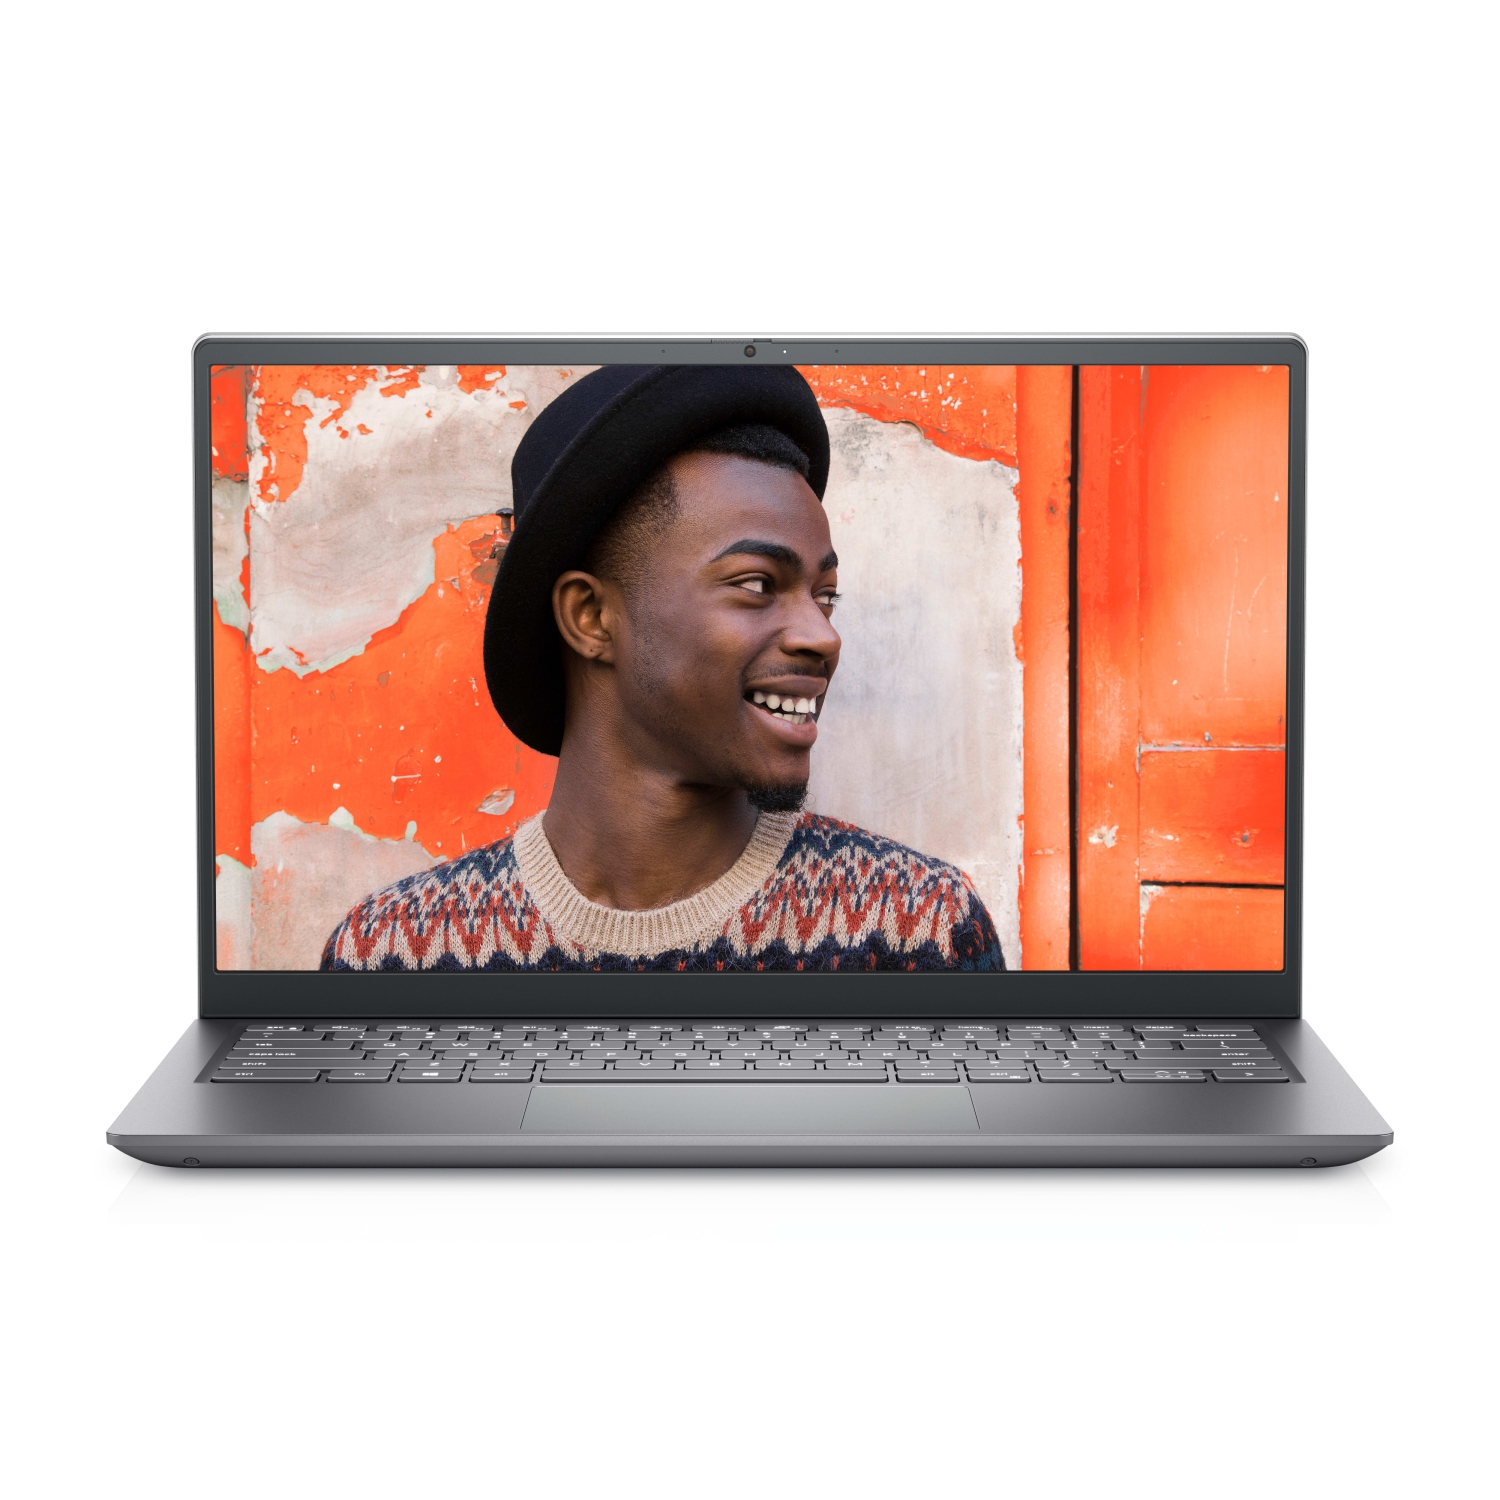 Refurbished (Excellent) – Dell Inspiron 5410 Laptop (2021) | 14" FHD | Core i7 - 2TB SSD - 32GB RAM | 4 Cores @ 4.8 GHz - 11th Gen CPU